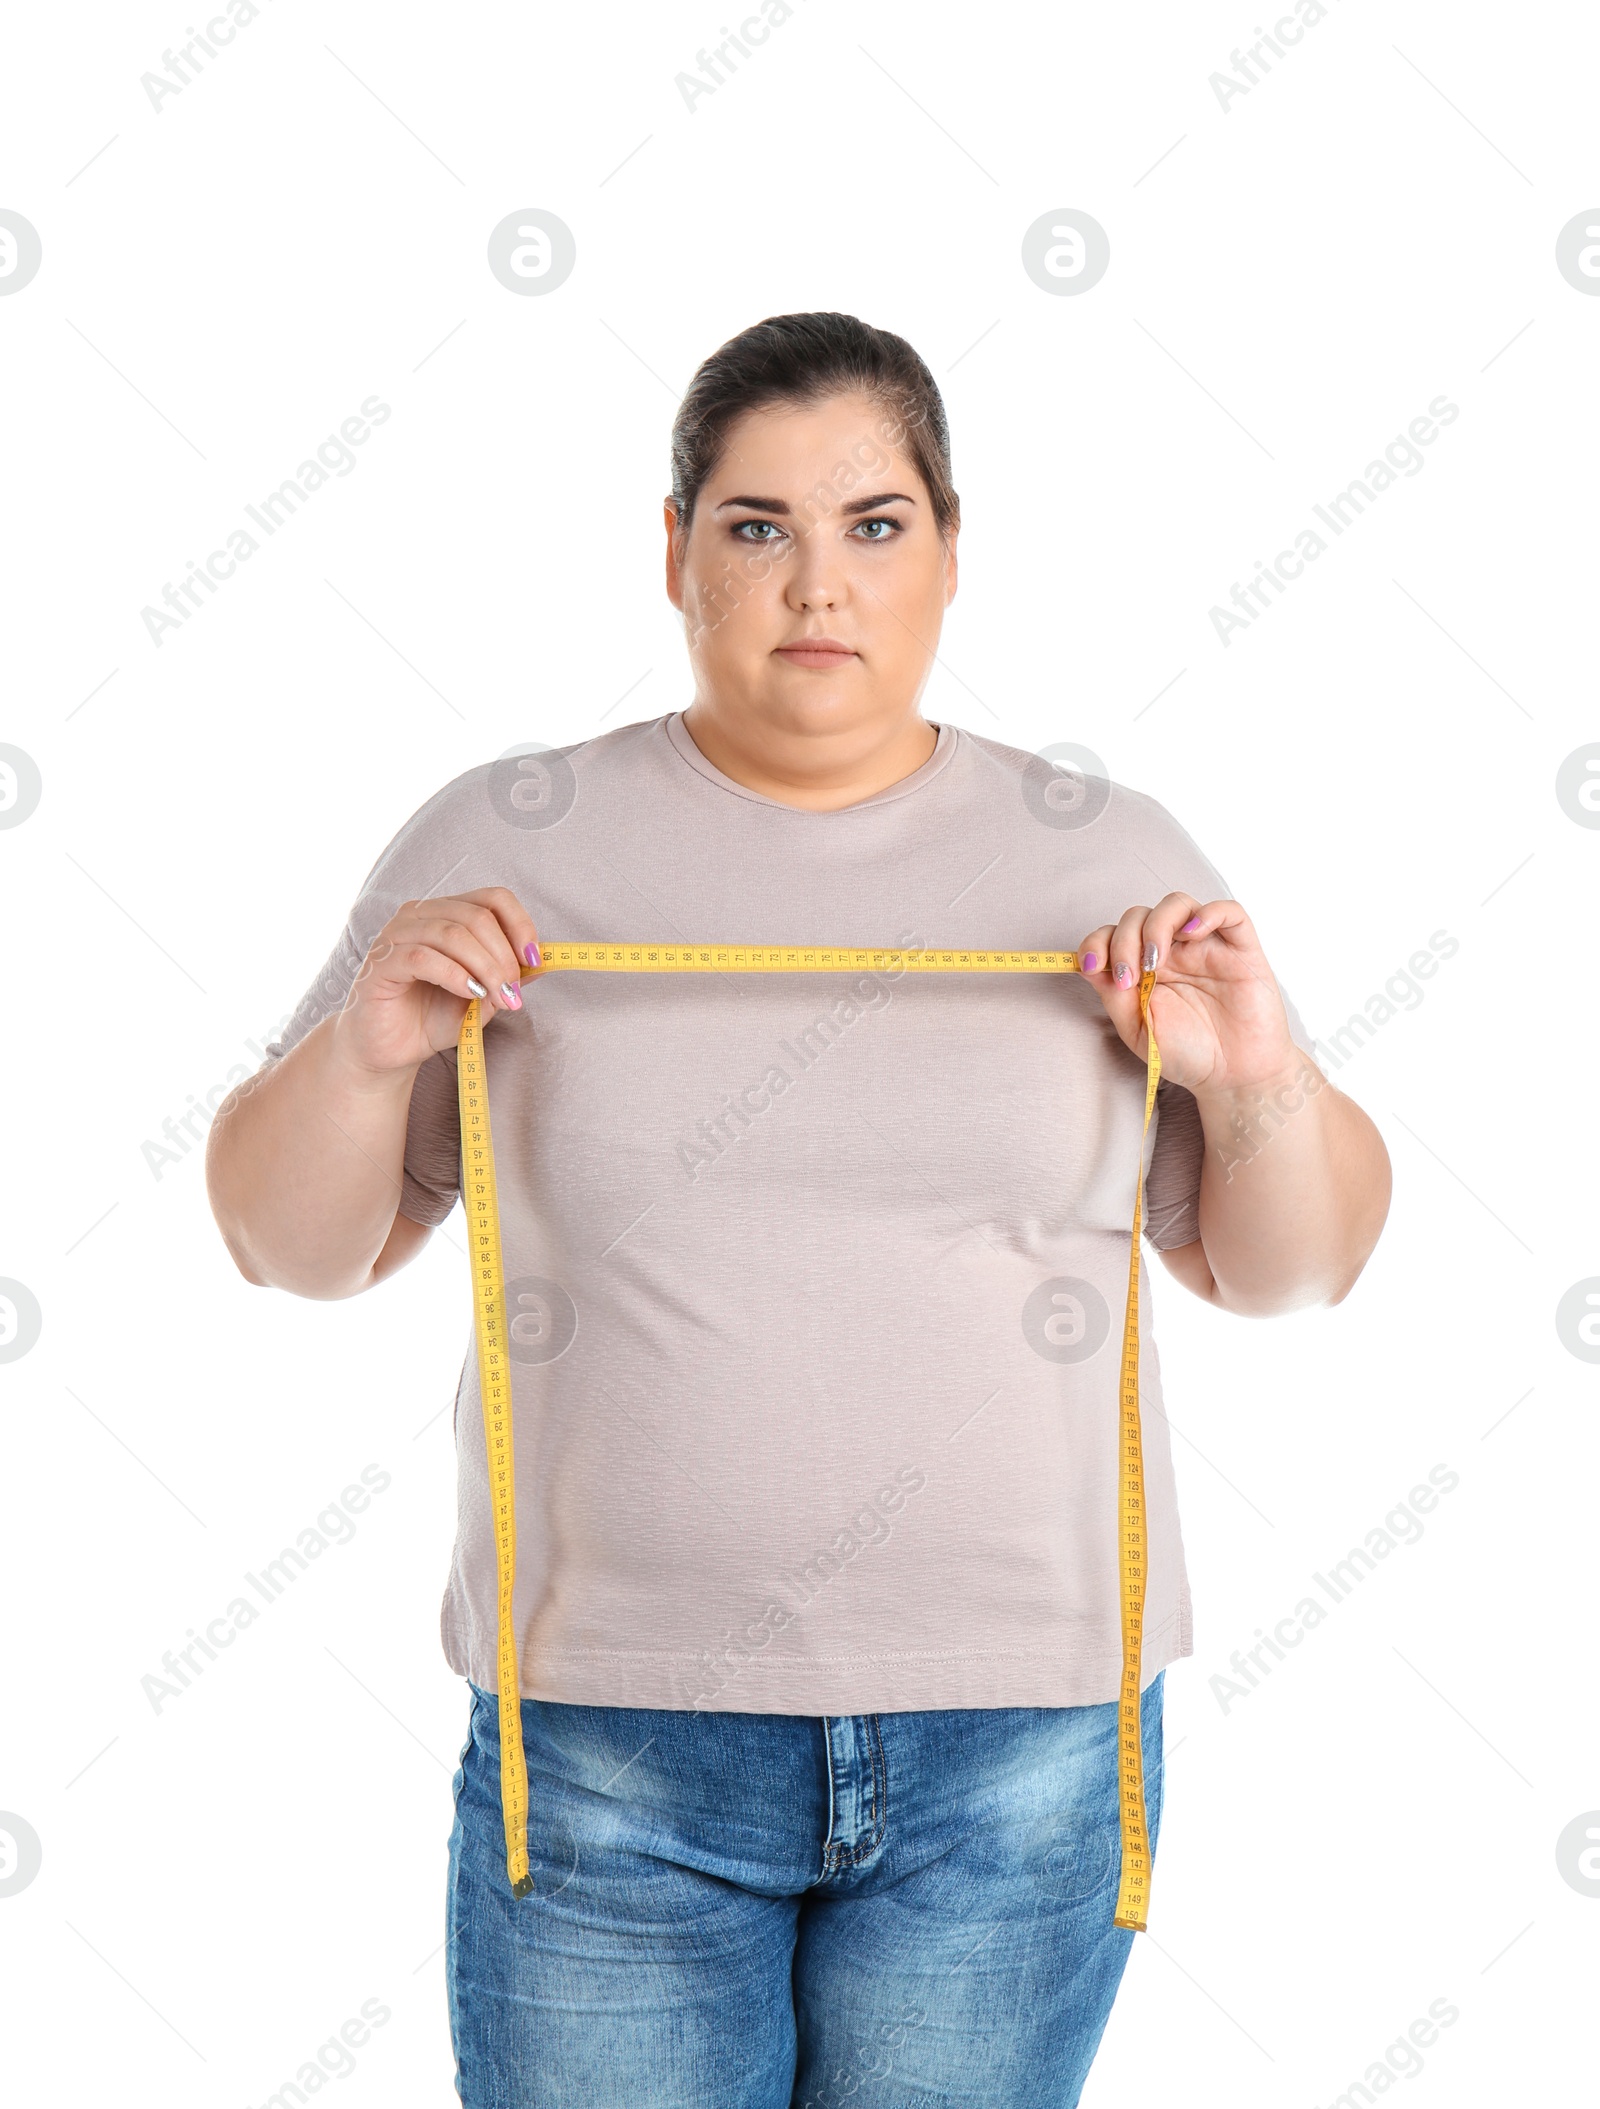 Photo of Overweight woman with measuring tape on white background